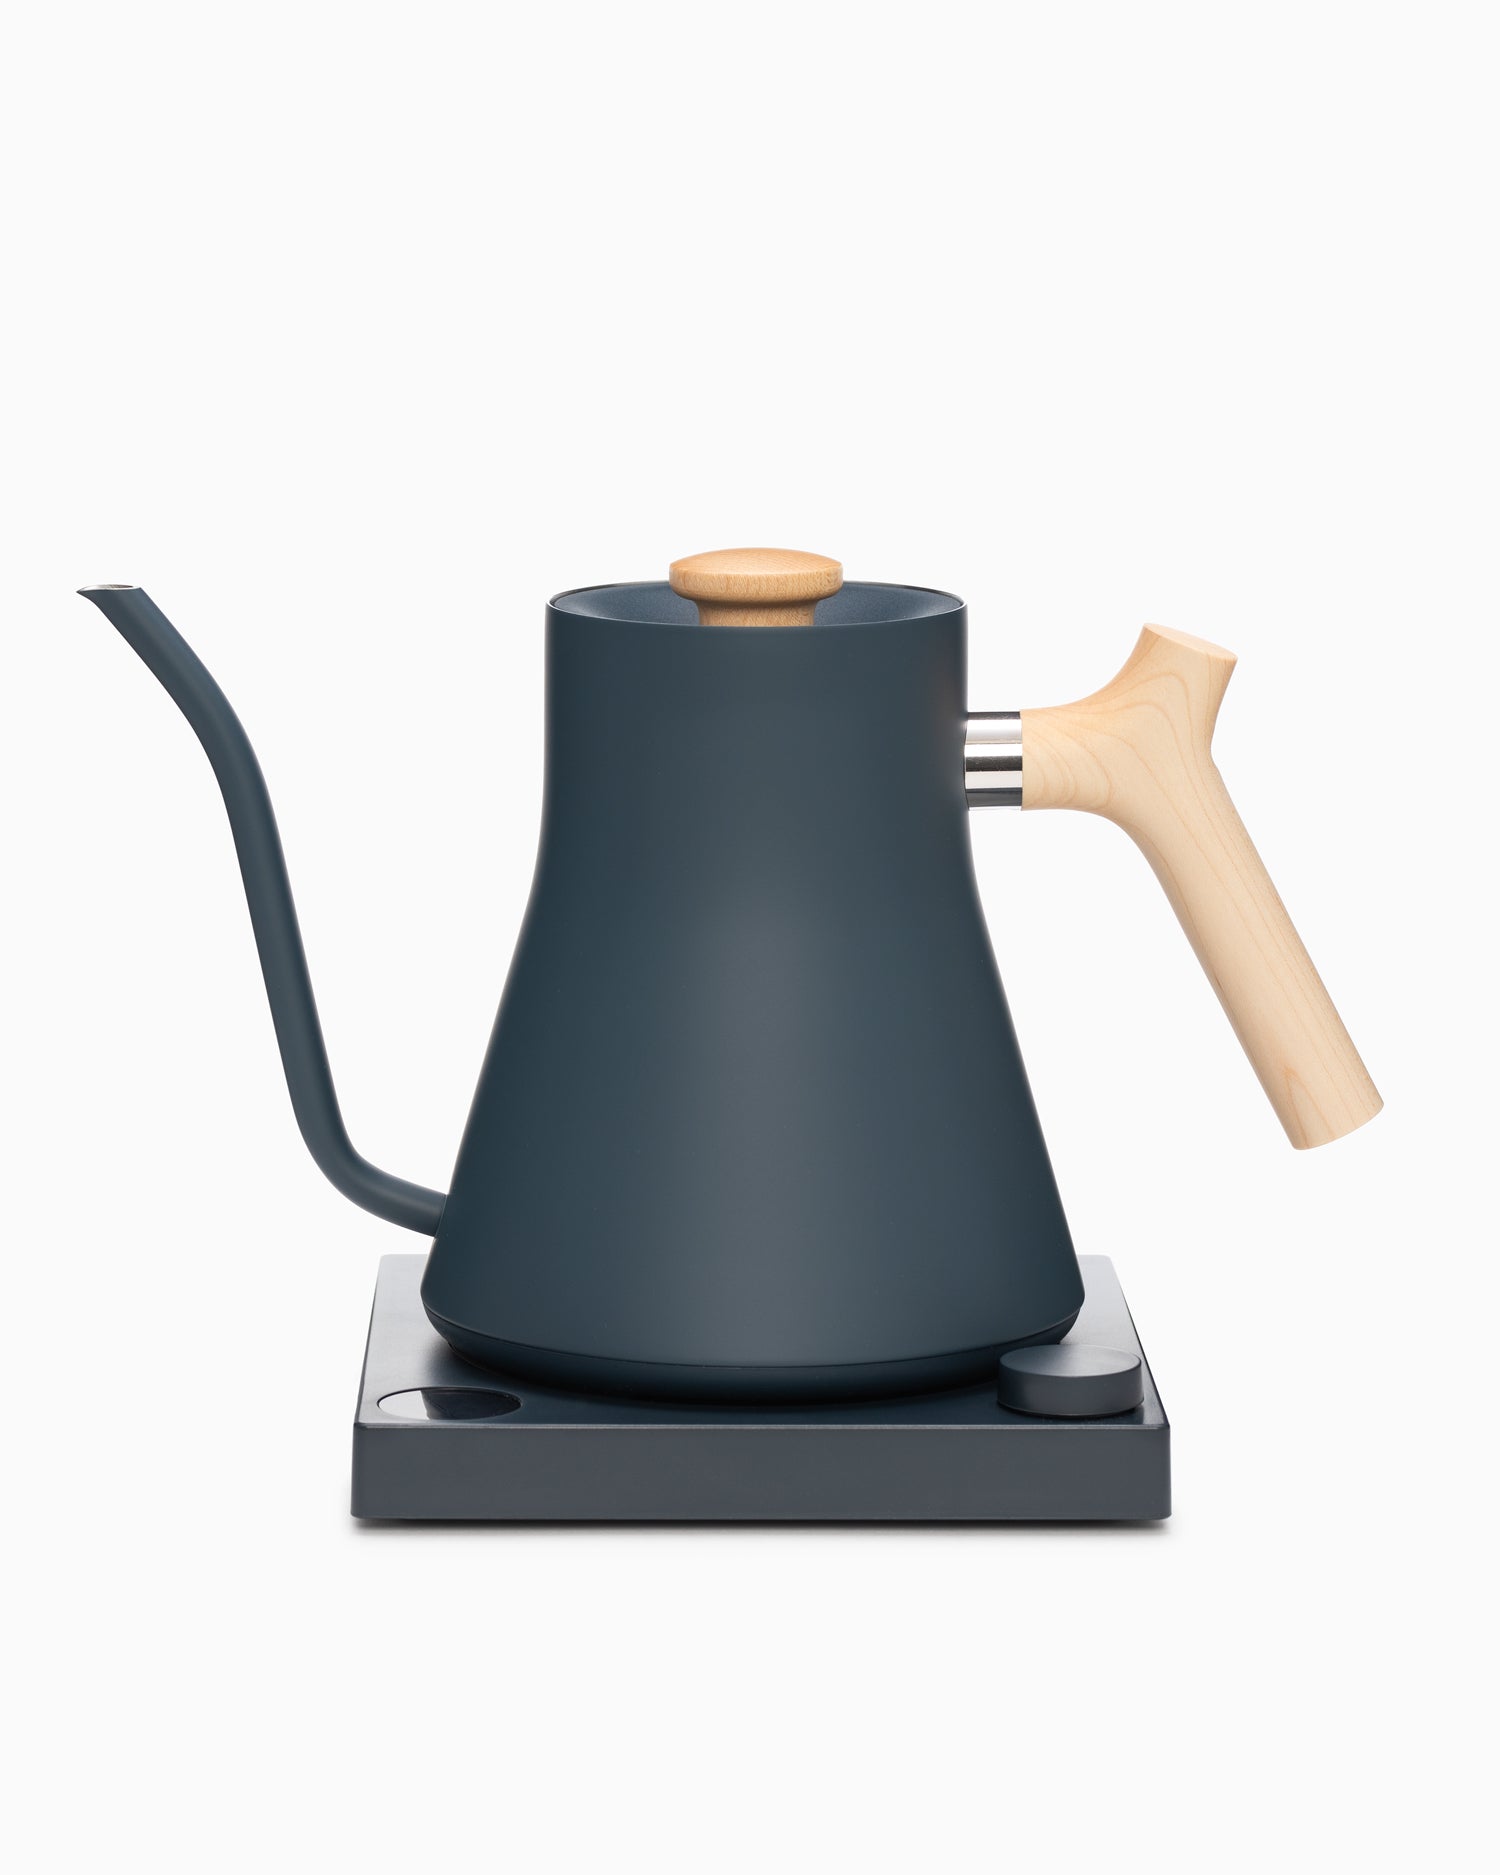 Stagg EKG Electric Kettle - Stone Blue and Maple